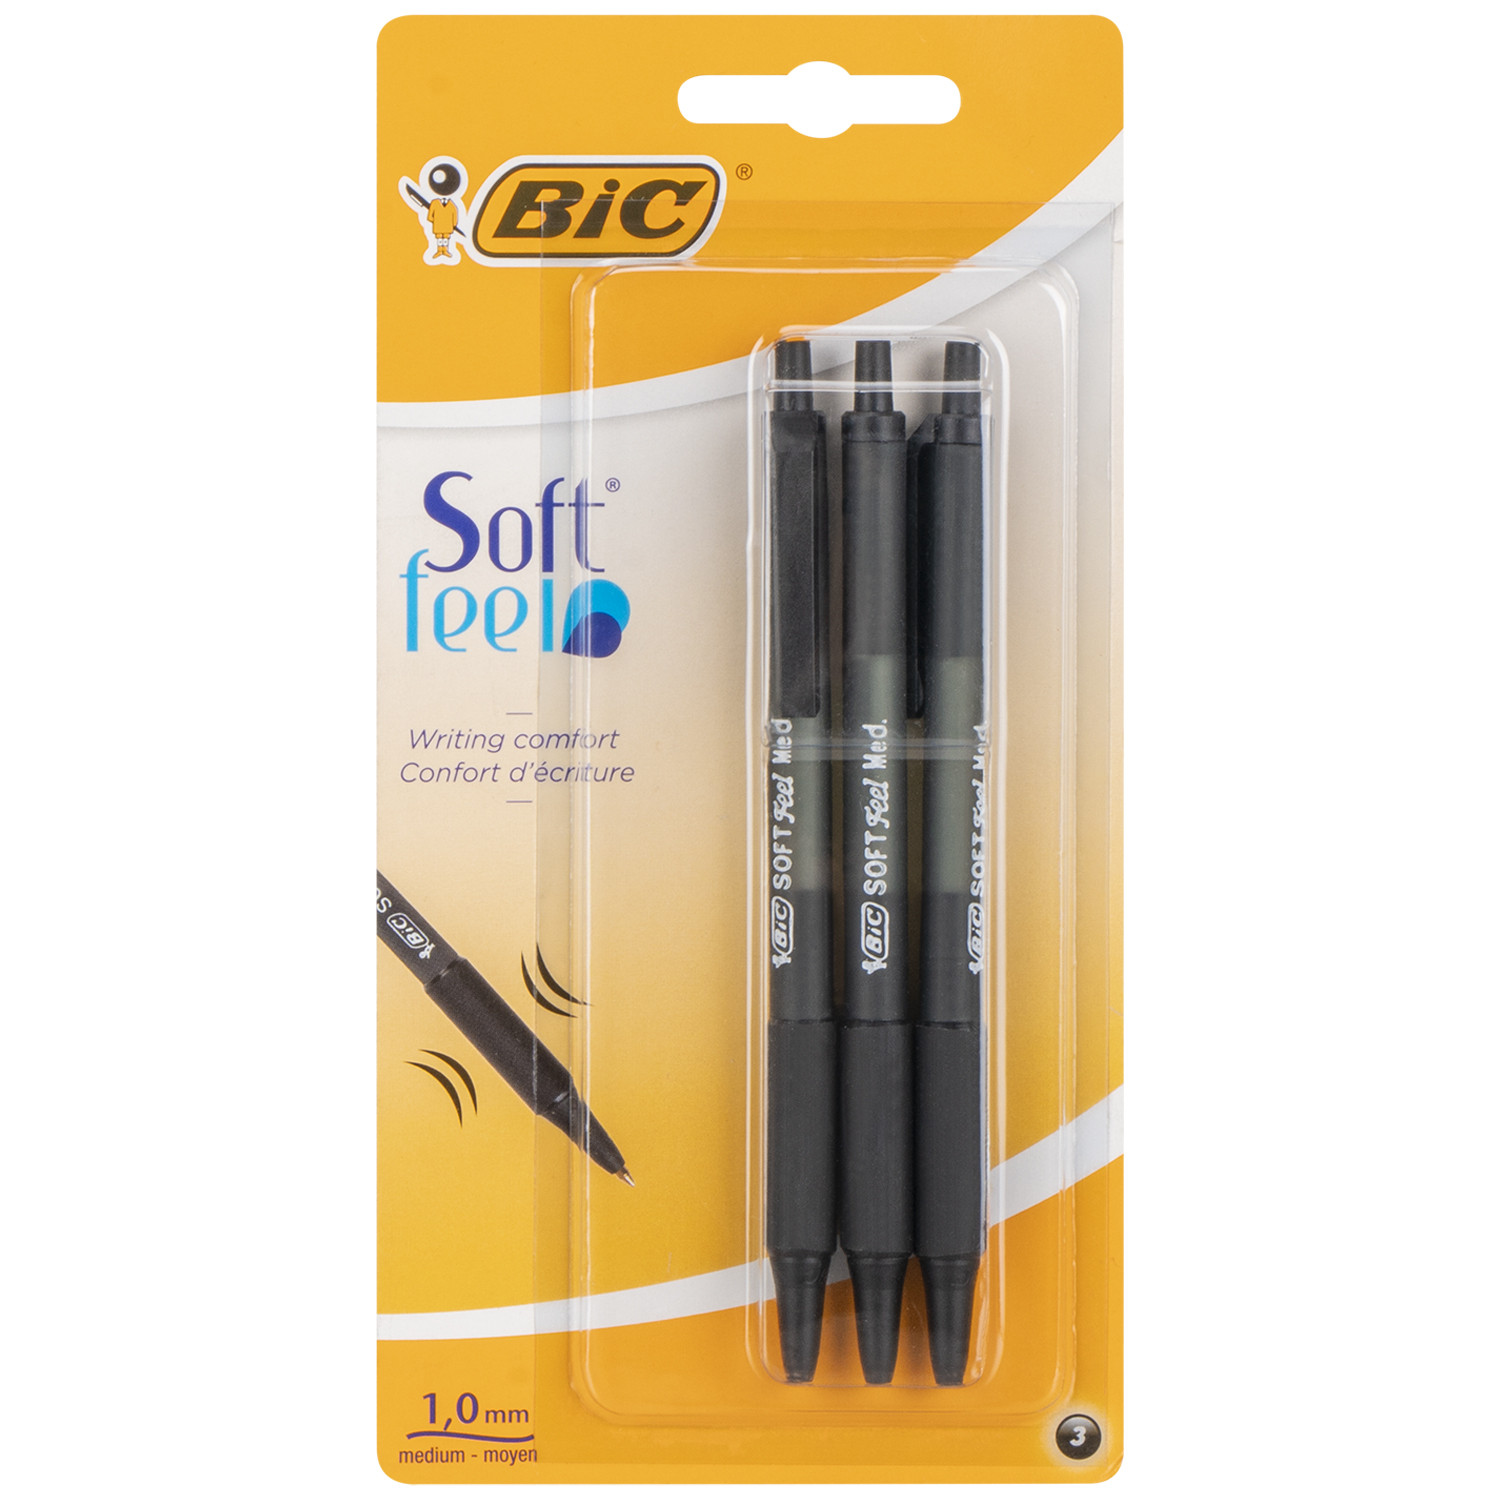 Pack of 3 BIC Retractable Soft Feel Ballpoint Pens - Black Image